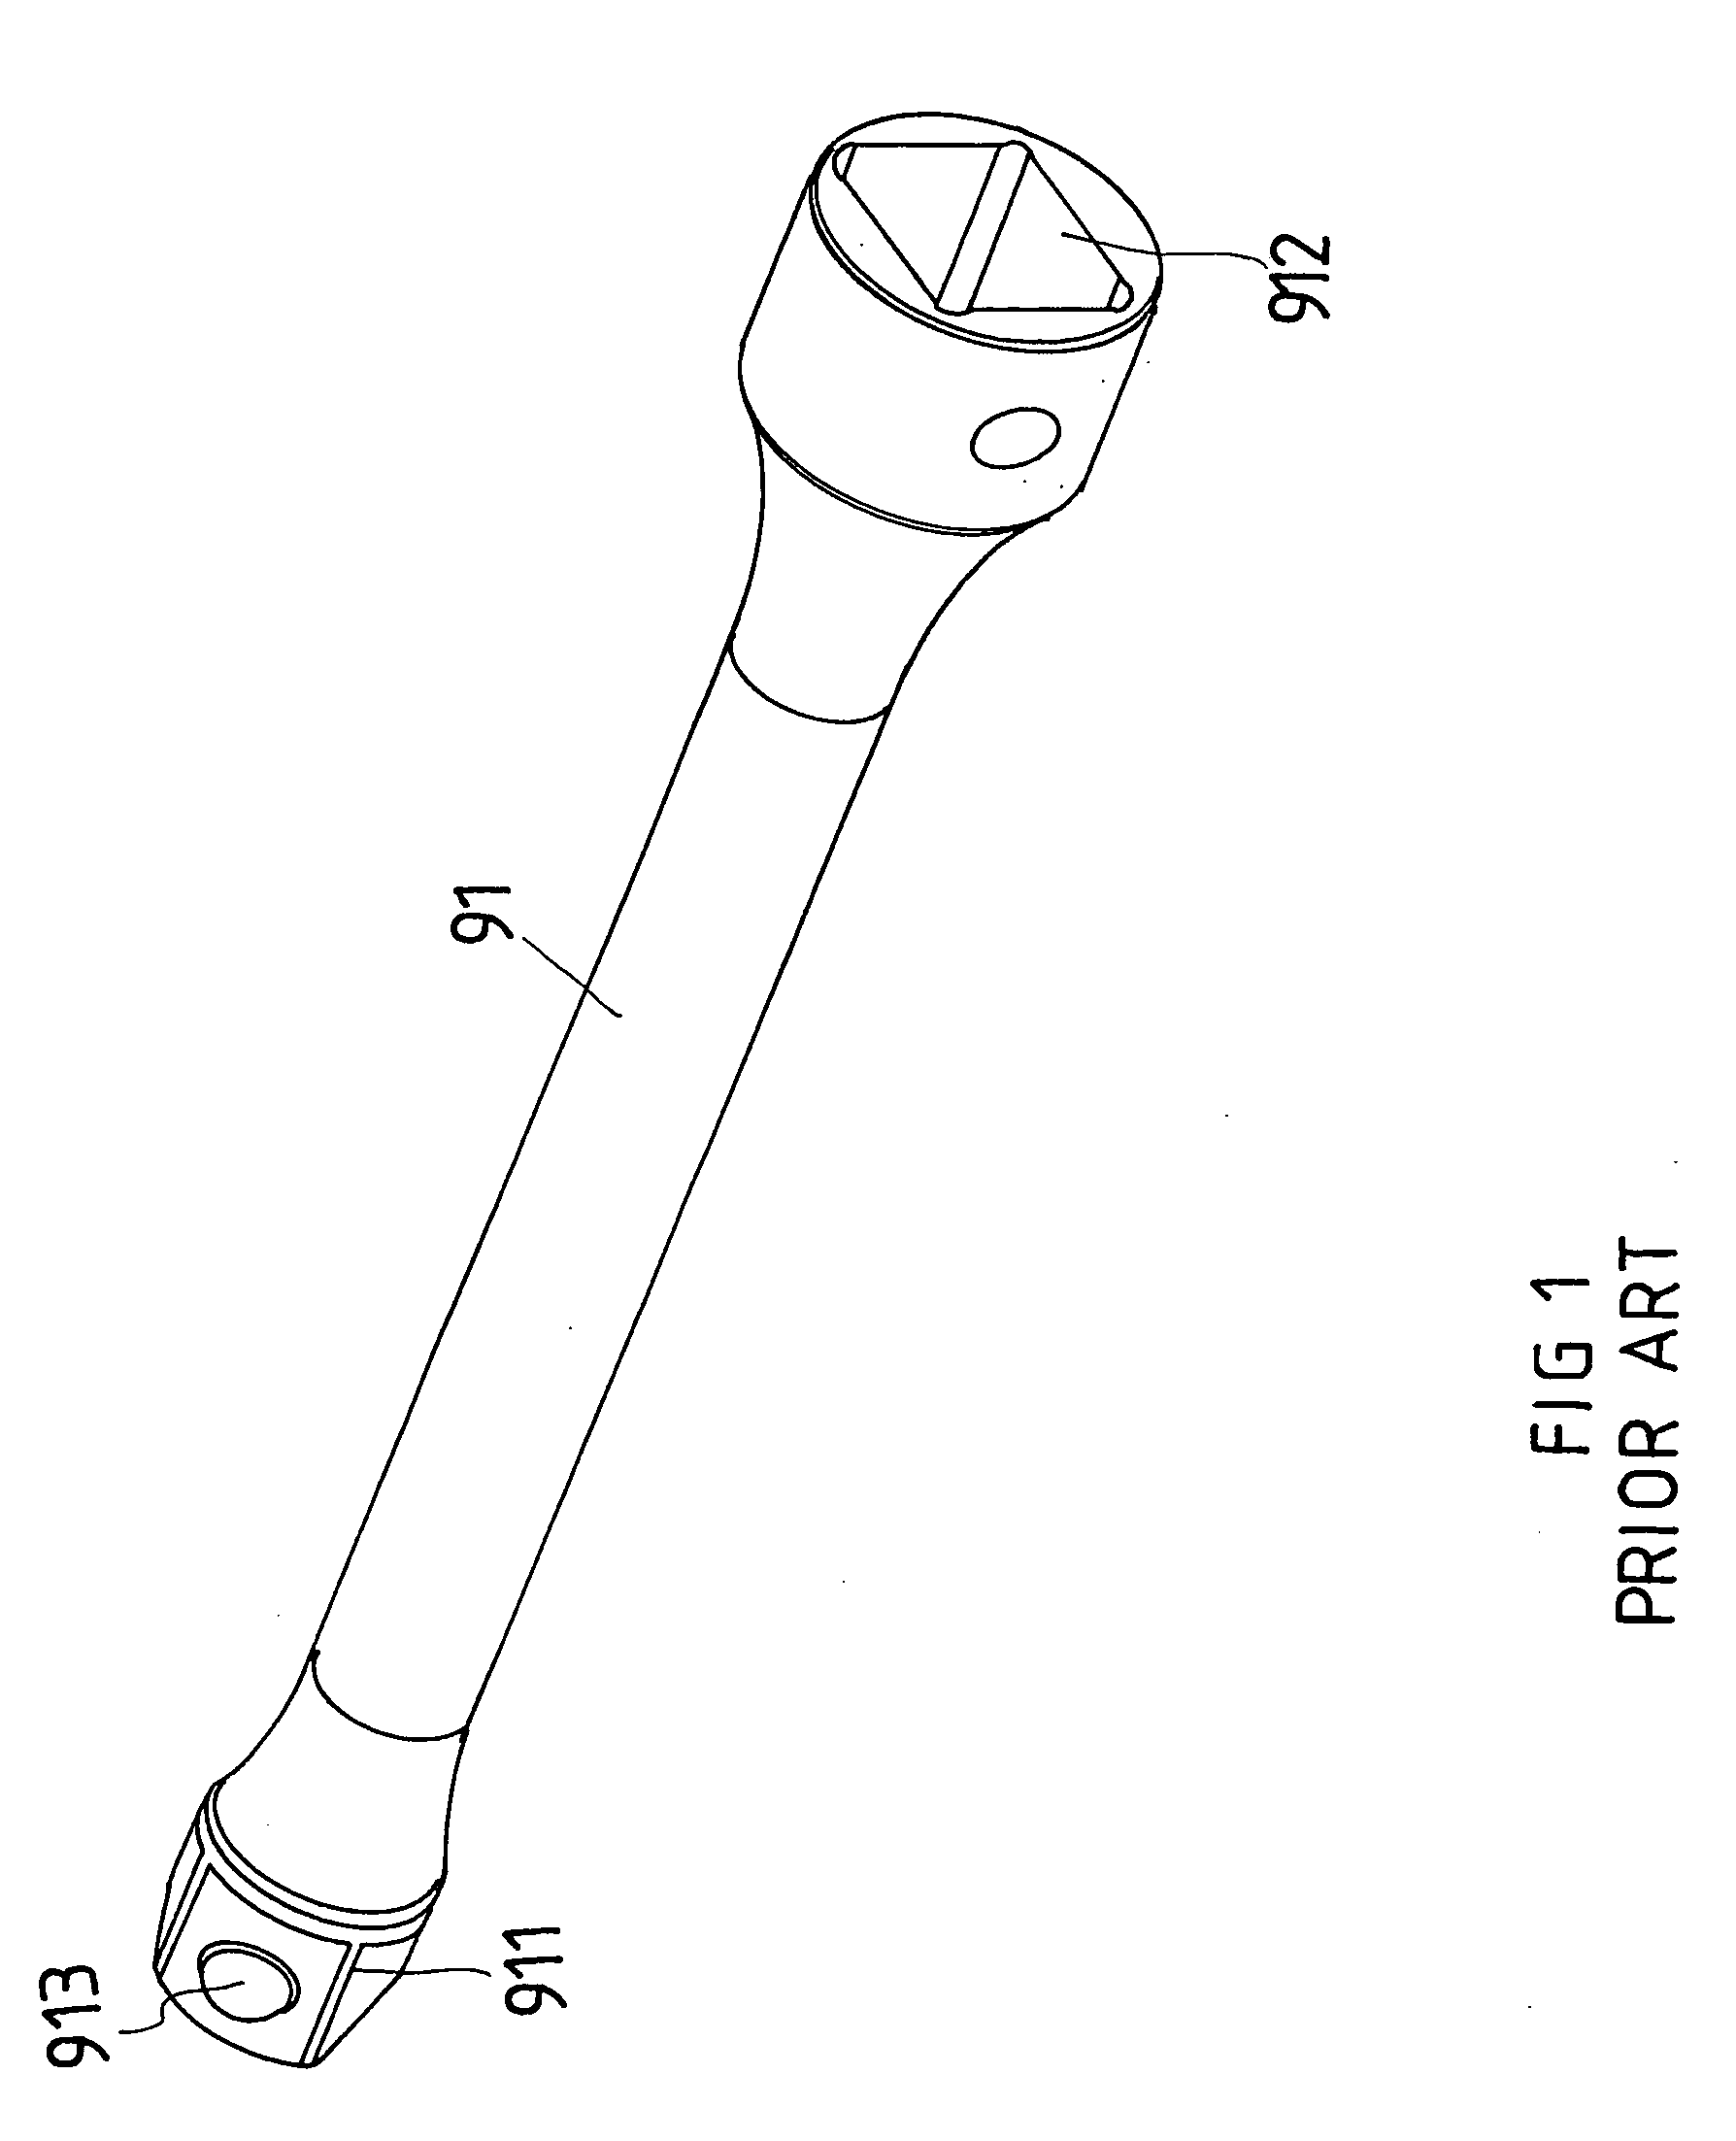 Structure of a fixed and turning connecting shaft